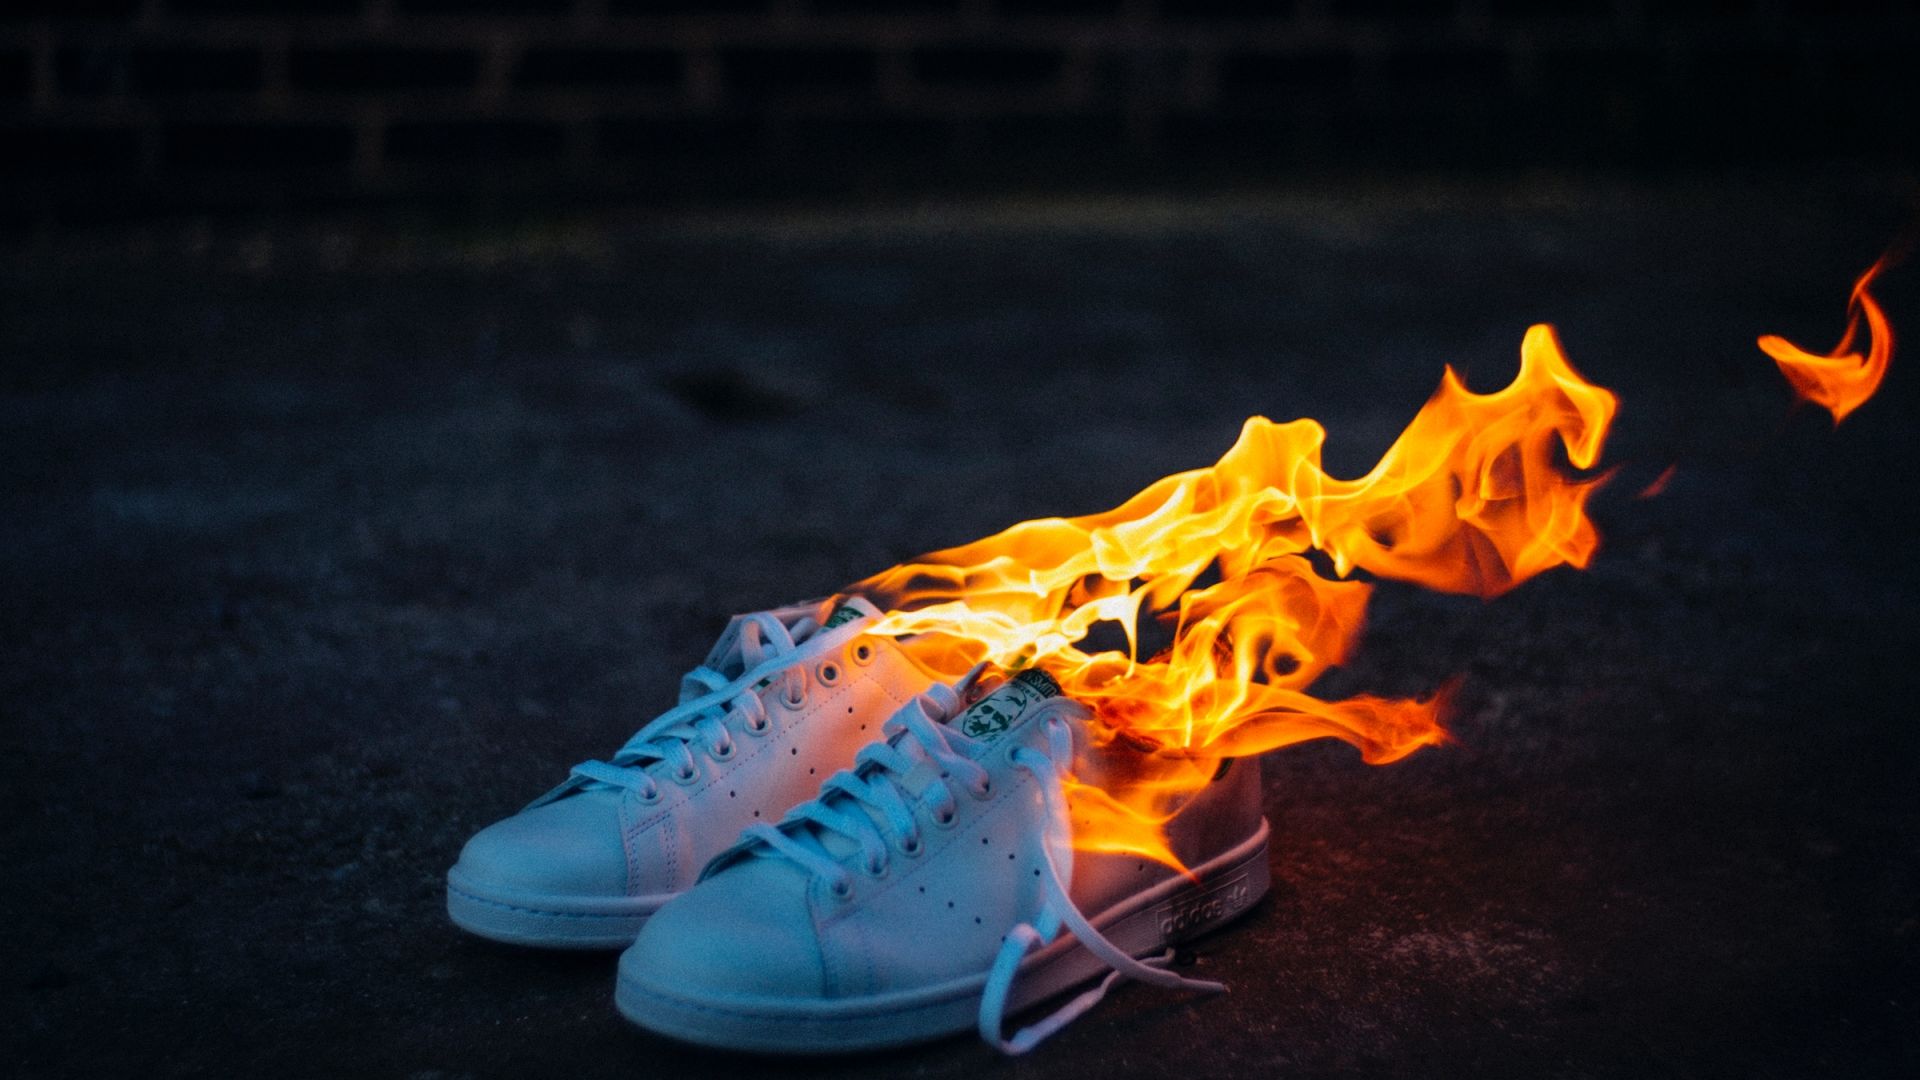 Wallpaper Shoes on fire, flames, sneakers